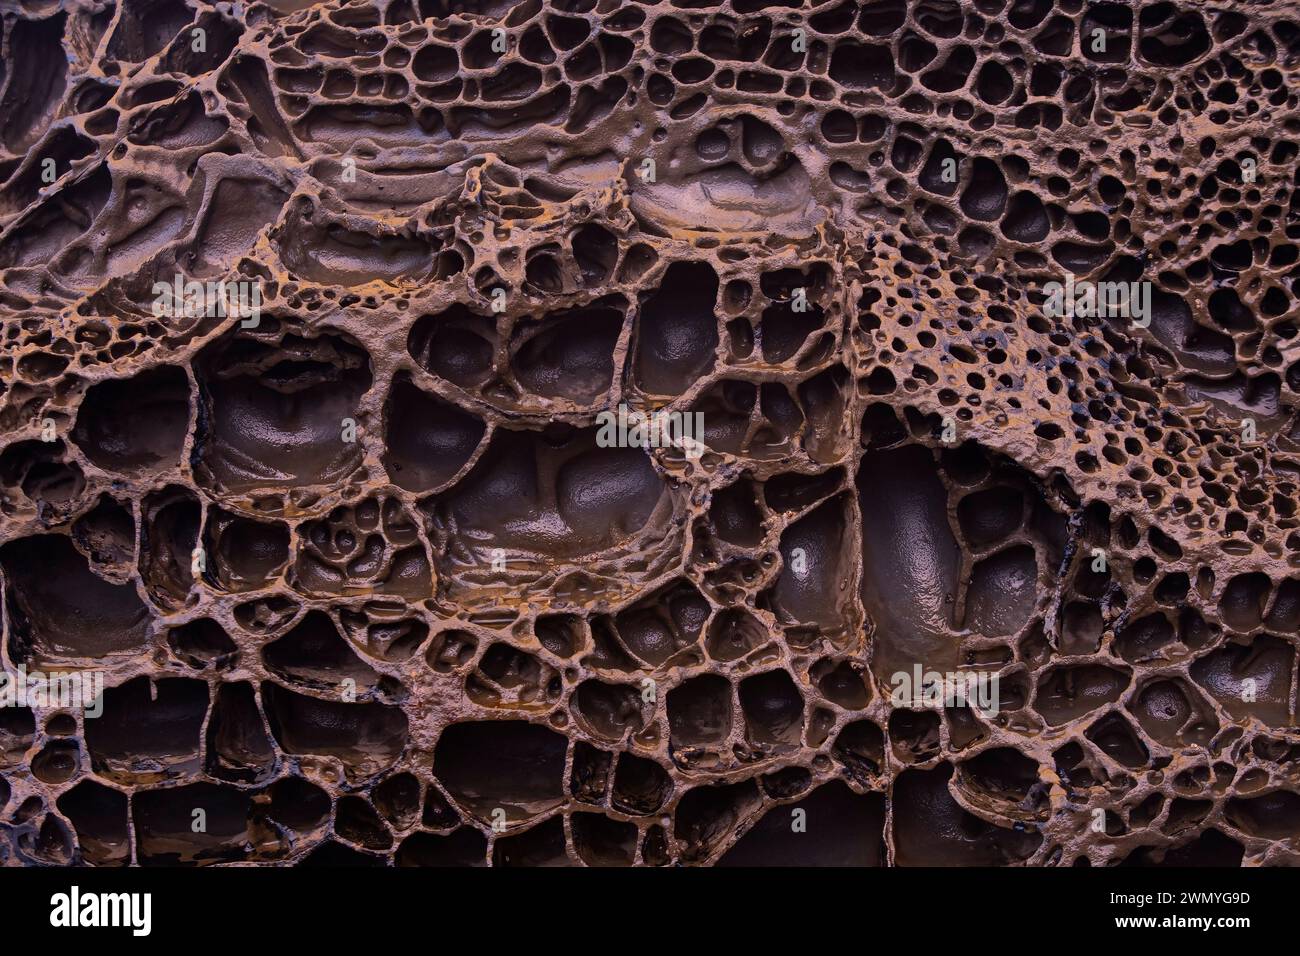 This image features close-up textures of biogenic rock formations due to biofilm bacteria found in iron-rich areas at Llumeres beach in Asturias. Stock Photo